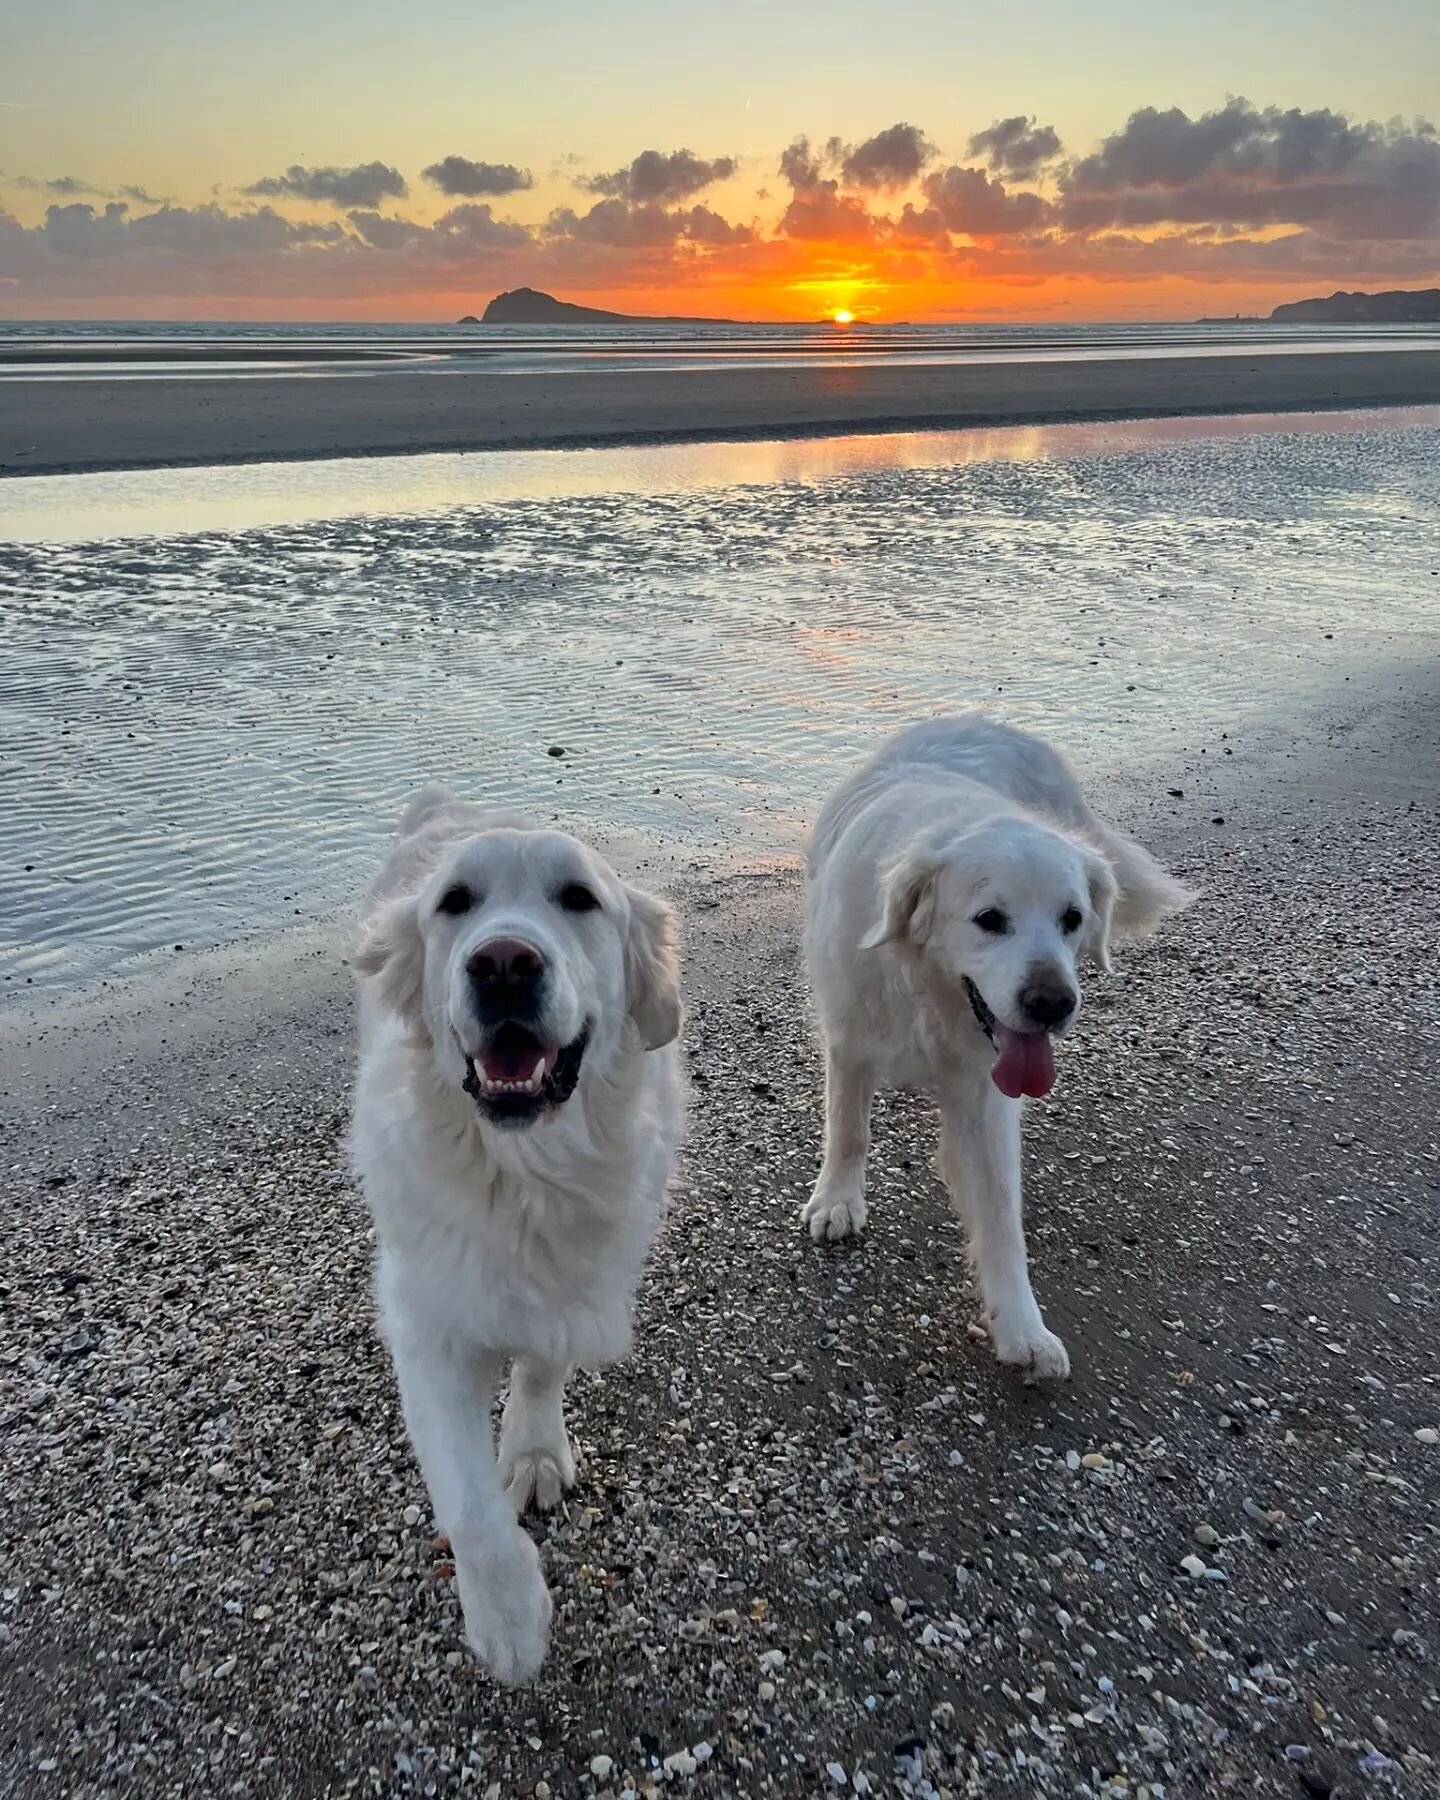 Good morning from Portmarnock 😁☀️💛
Rise and shine its nearly the weekend! Olly and Bobby sending you good vibes 🙌
See ya soon for ☕️ 🥐🥓🍳